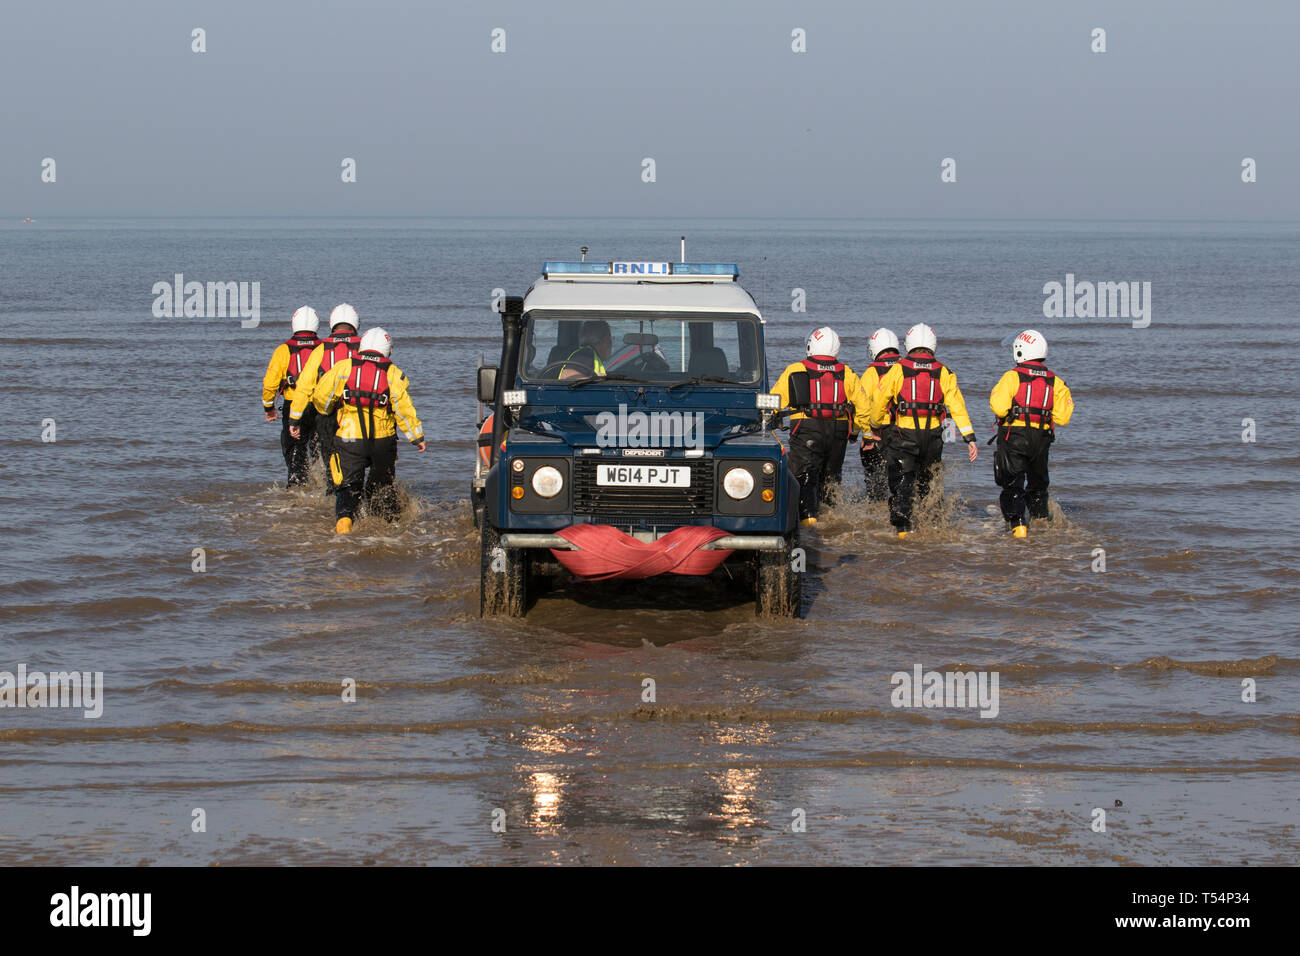 Land Rover rescue crew & boat launch in Blackpool, Lancashire. 21st April, 2019. UK Weather.  Lifeguards and lifeboat crew join forces, training exercises in the Irish Sea. Stock Photo